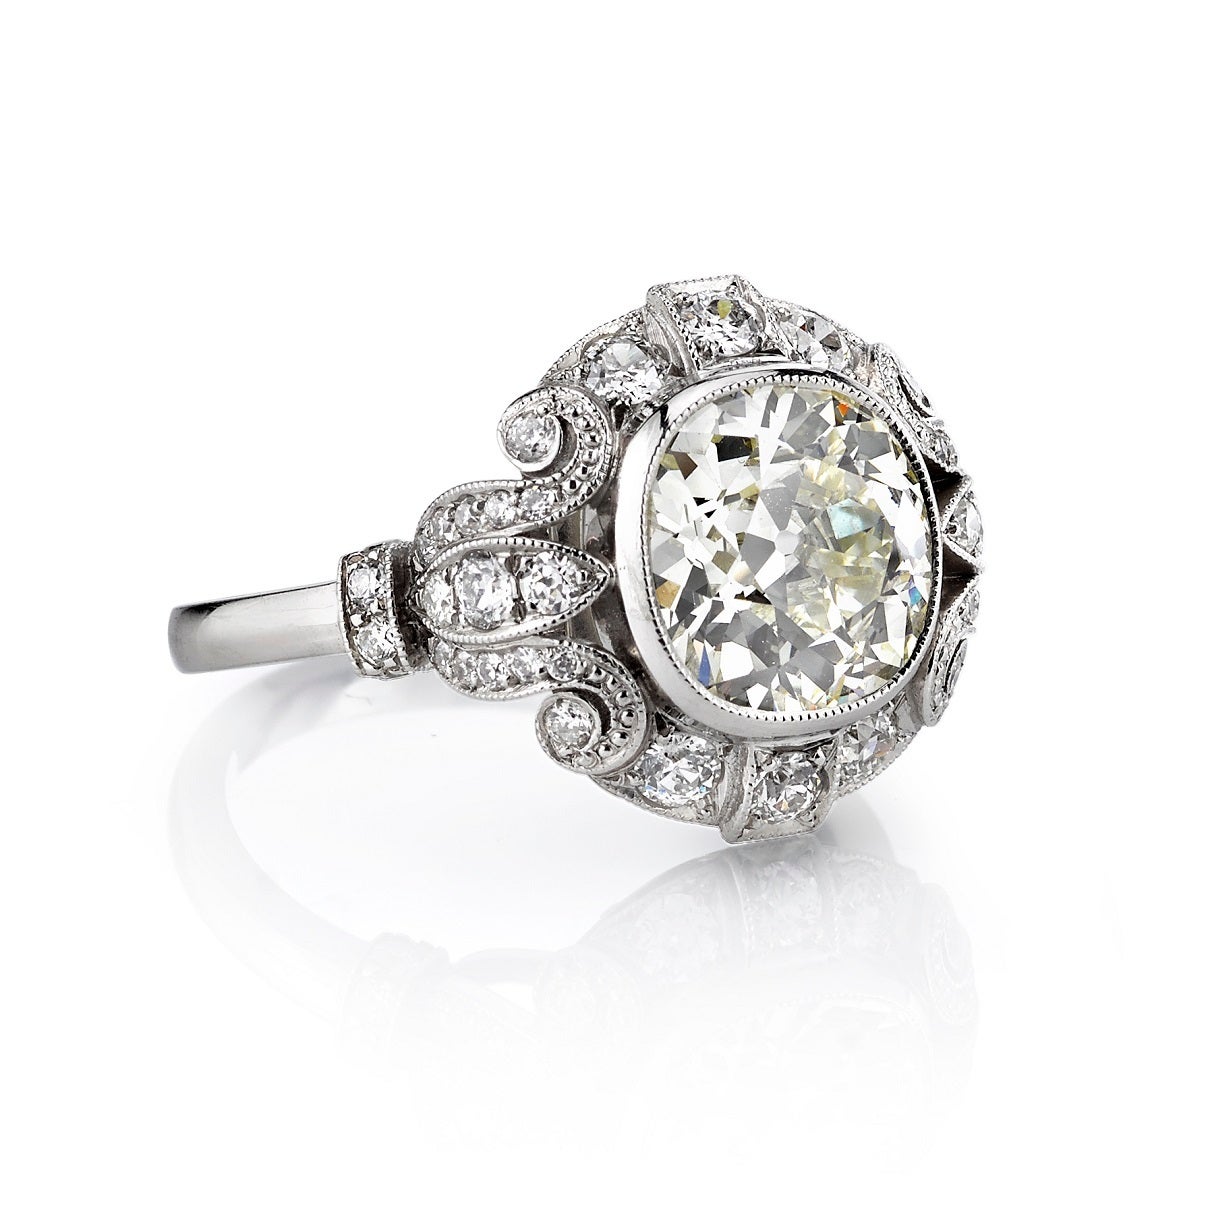 2.69 M/VS1 Cushion cut diamond that is EGL certified and set in a platinum handcrafted 